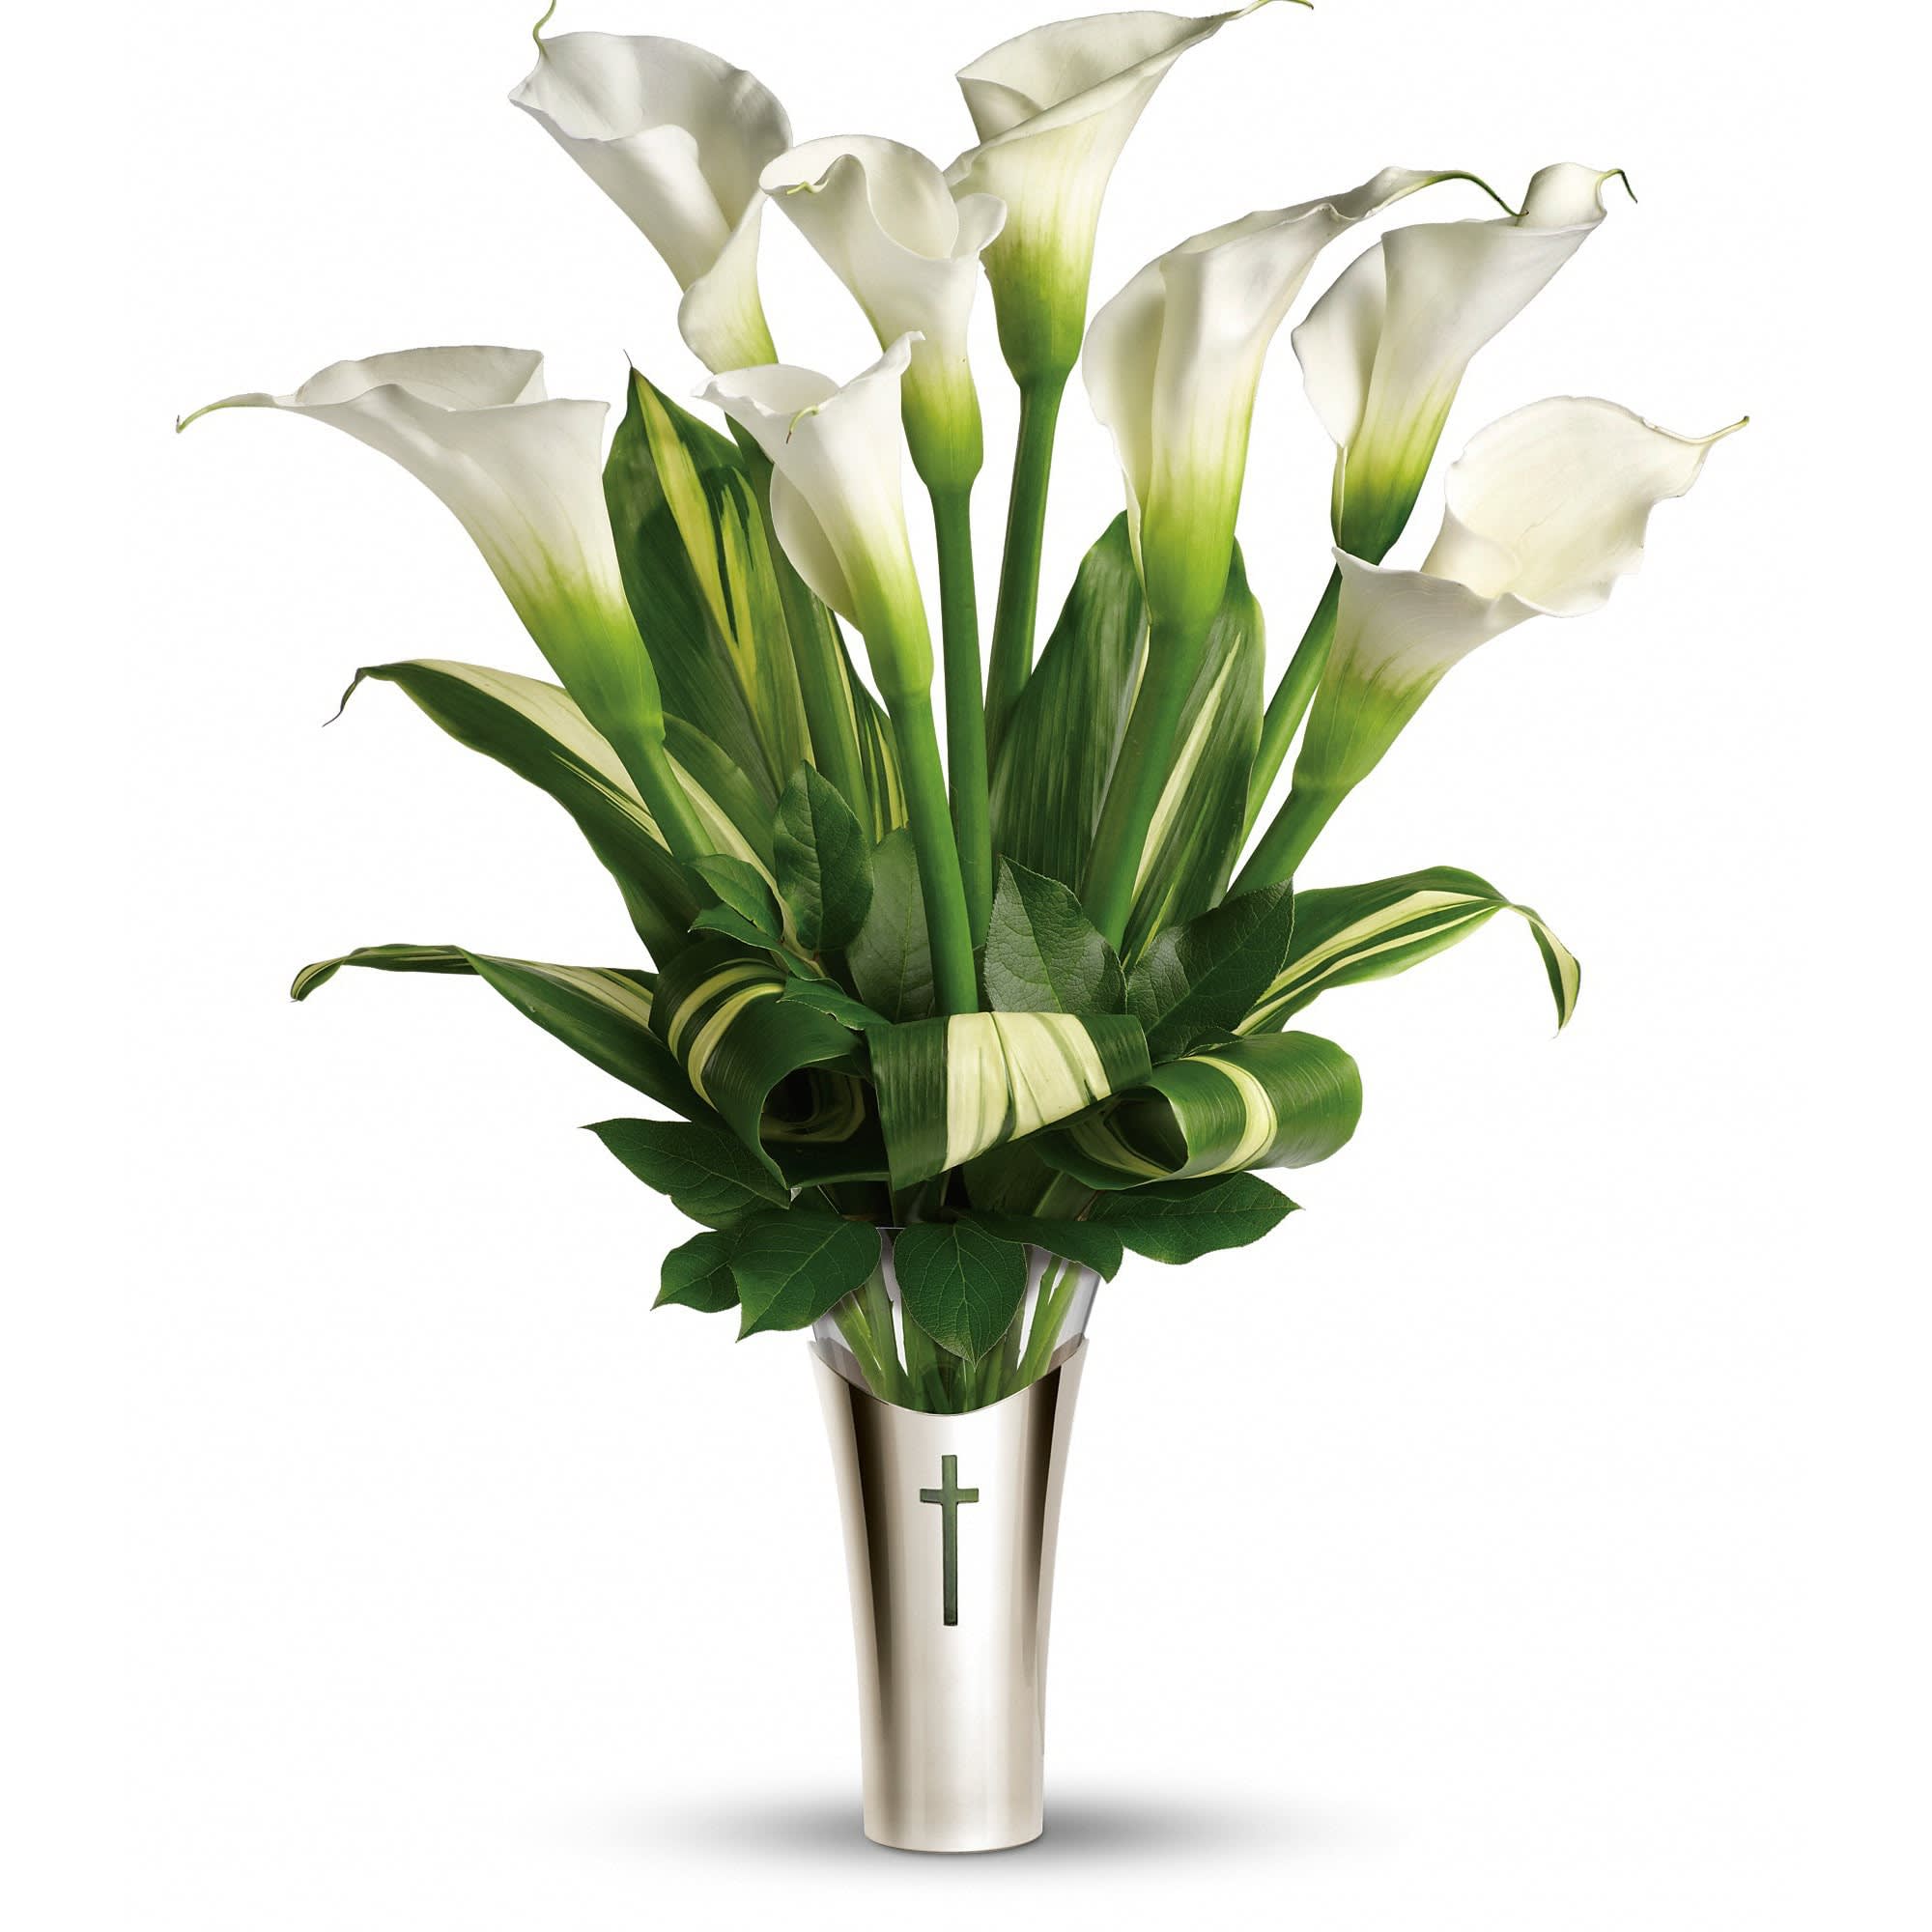 Teleflora's Inspiration Bouquet - Surprise someone special with this lovely inspirational gift of white calla lilies in a glass vase inside a silver-plated sleeve. Graced with a beautiful cross motif, it's a joyful gift they'll love now and forever.  